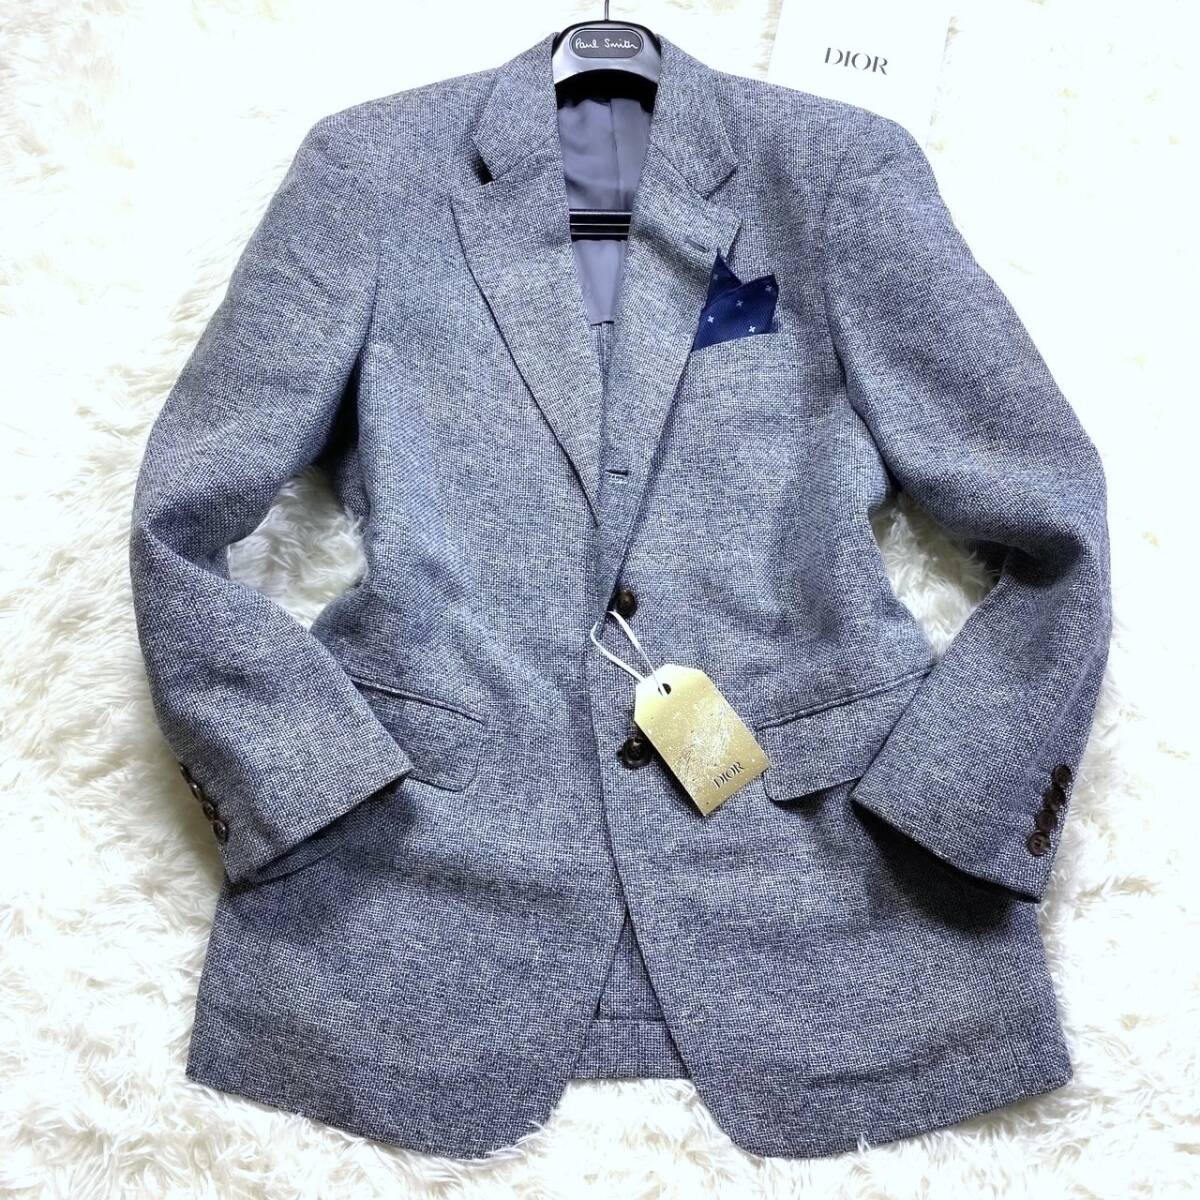  ultimate beautiful goods Christian Dior tailored jacket XL.LL~Lme Ran ju... mesh ground high class silver tag unlined in the back large spring summer direction Homme Christian Dior Homme 